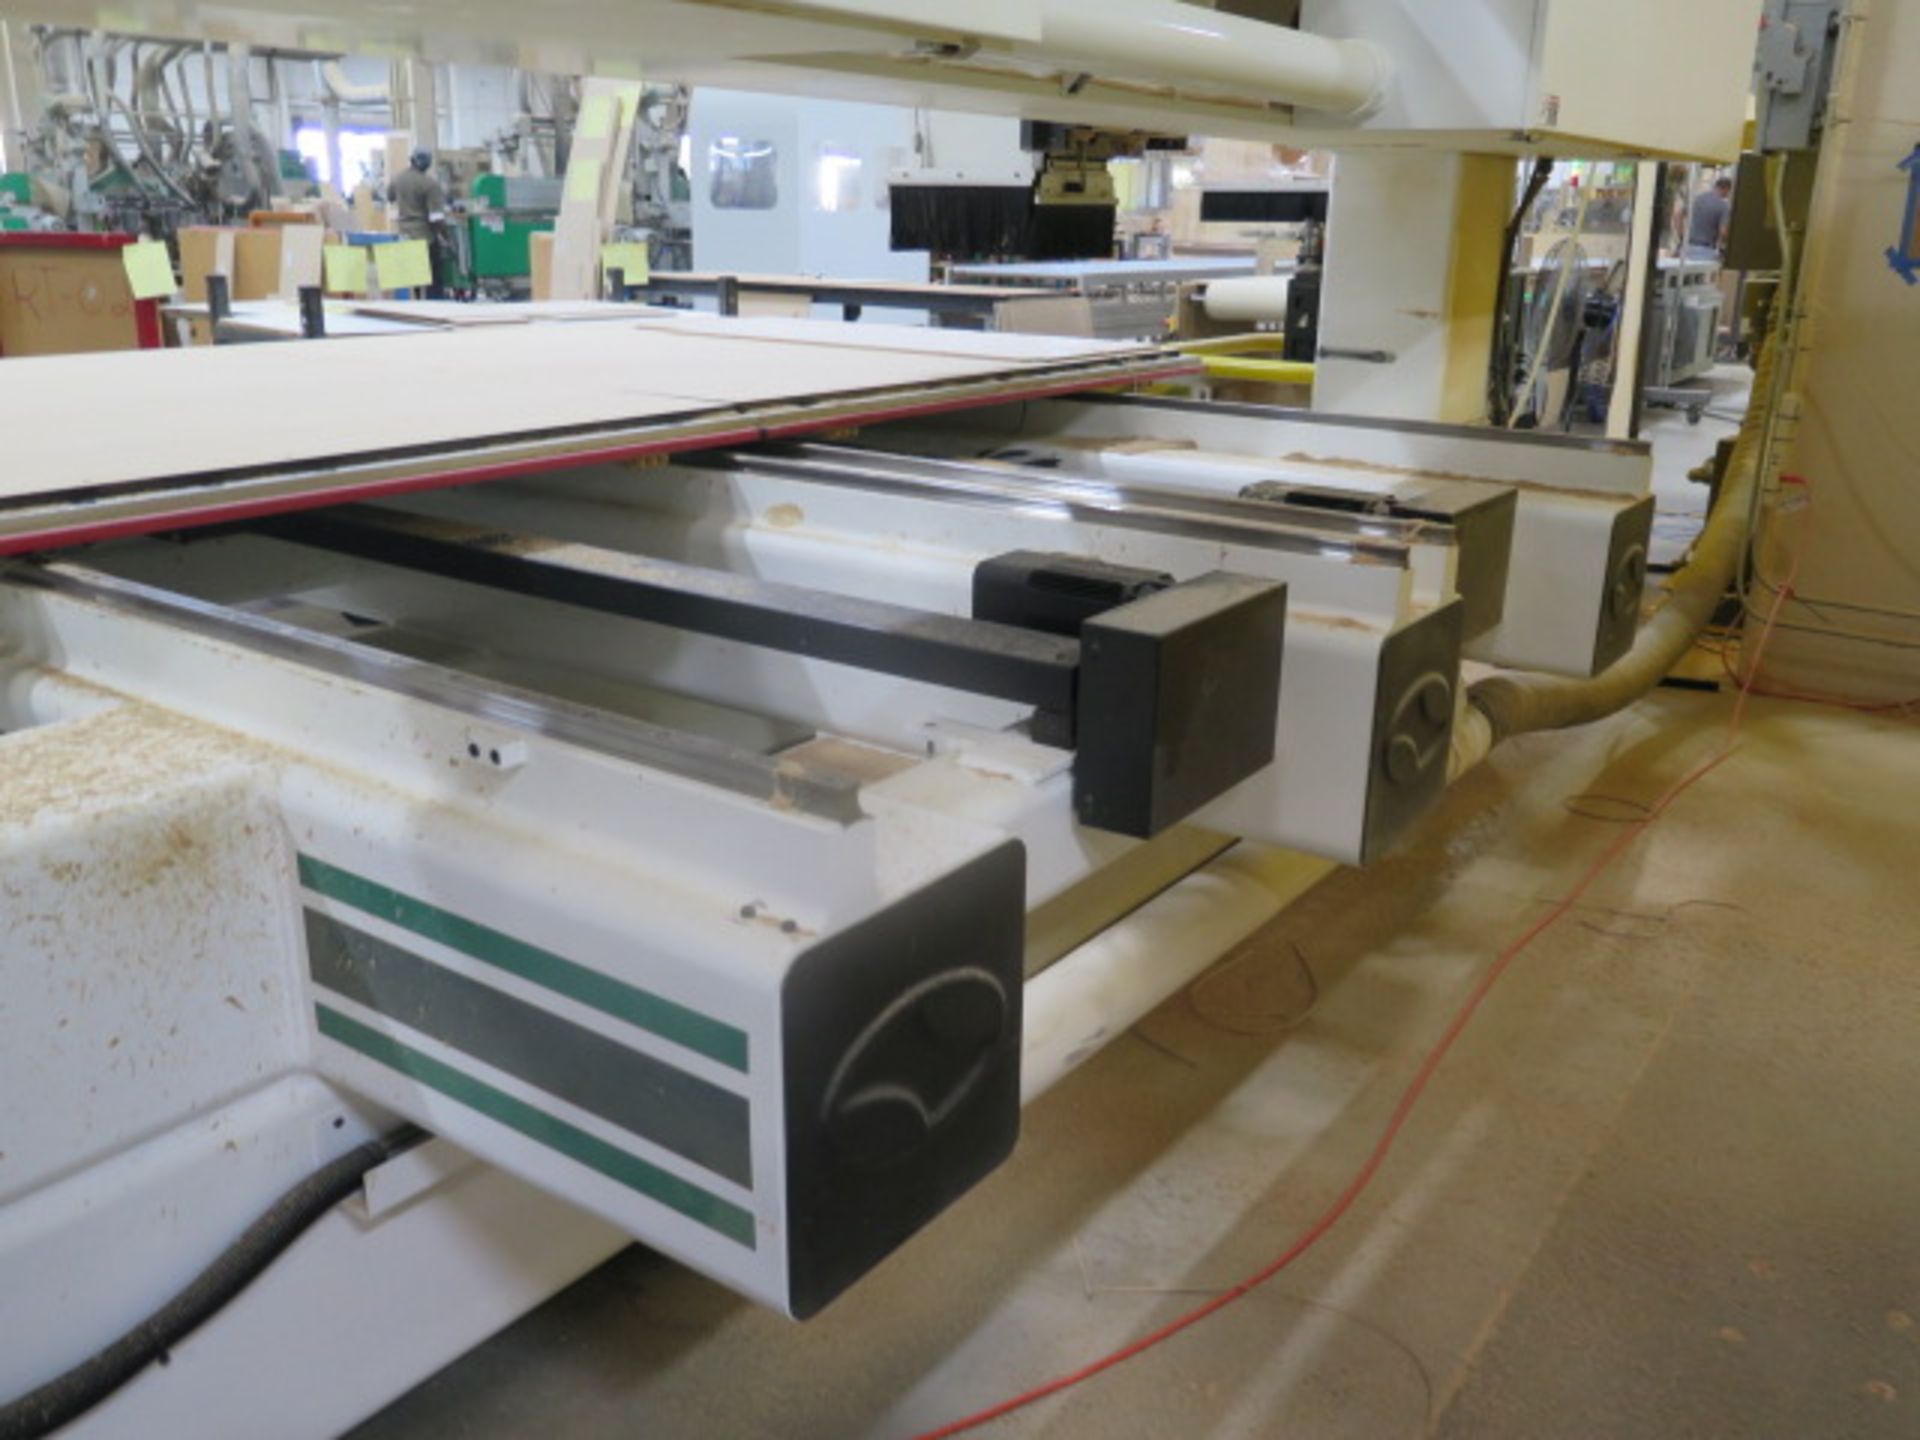 2008 C.R. Onsrud 122C18 CNC Router s/n 12280701 w/ WinMedia CNC Controls, SOLD AS IS - Image 16 of 18